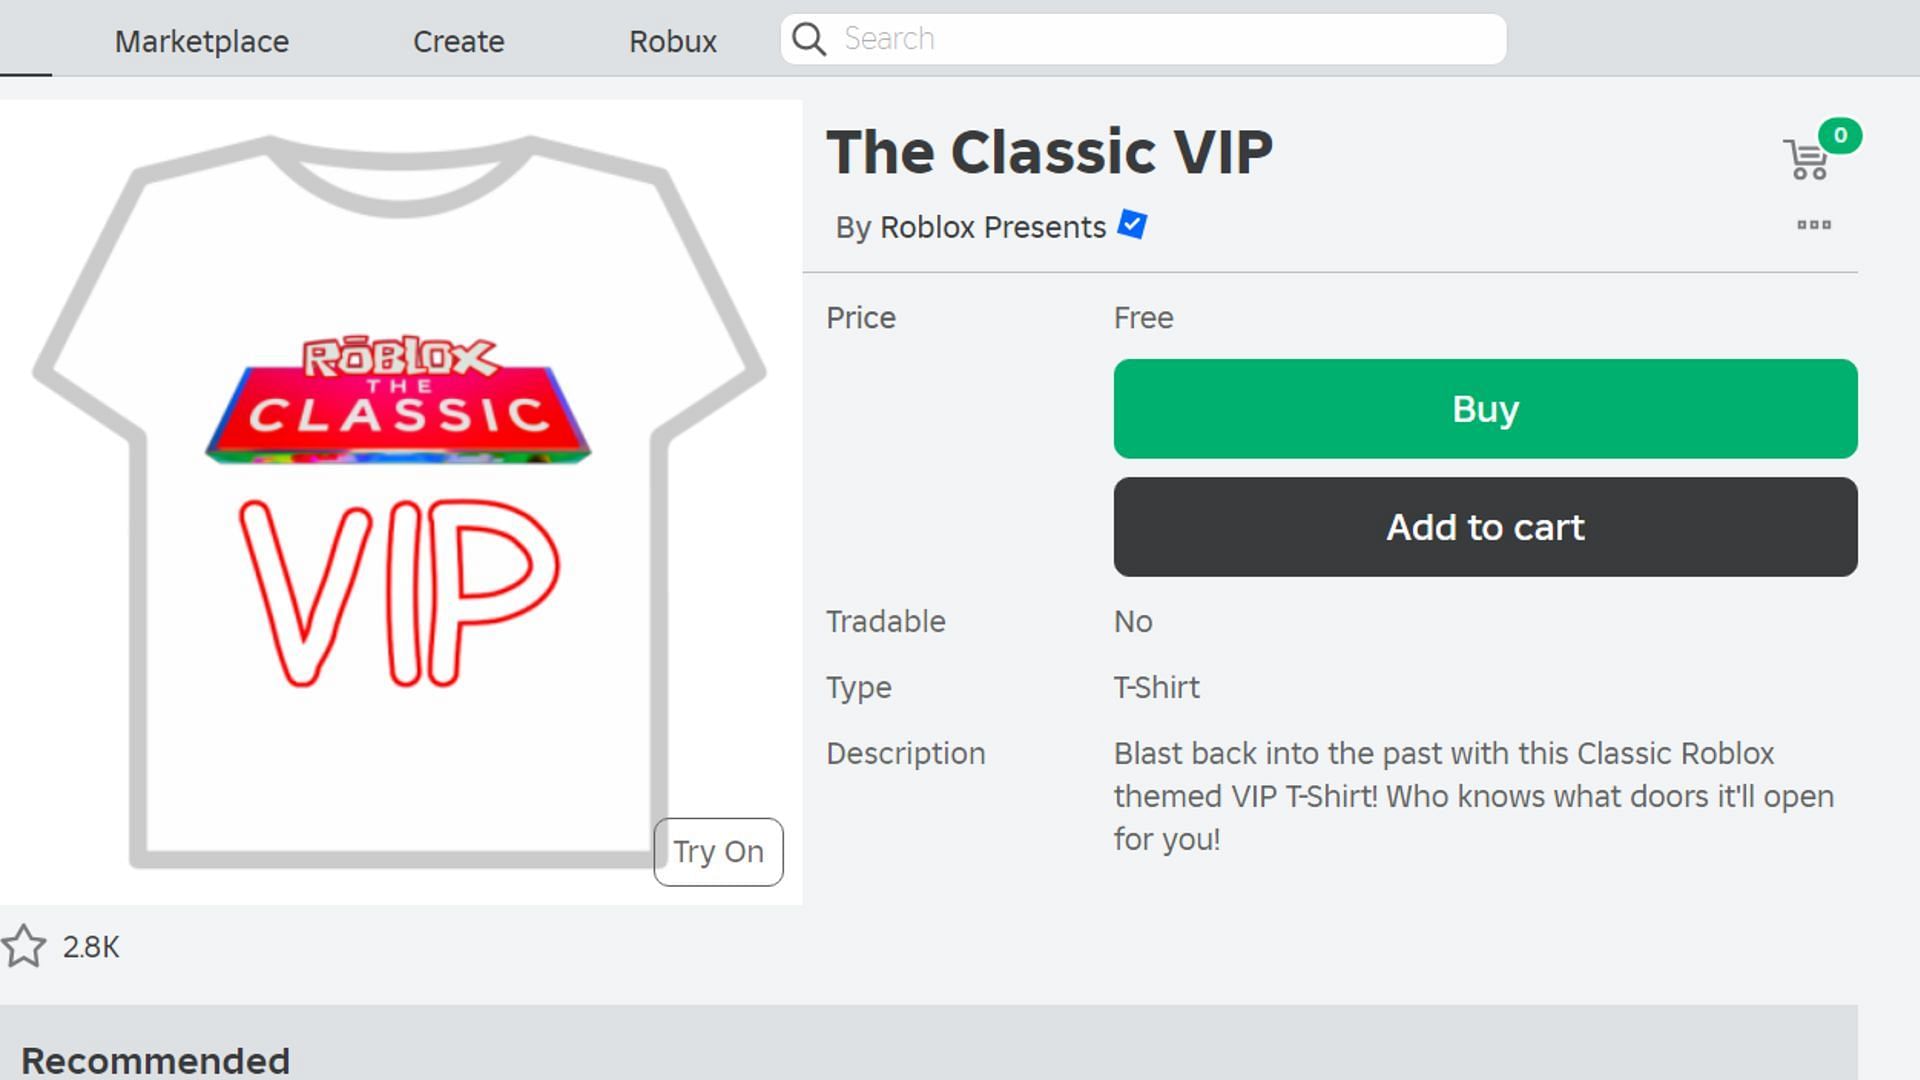 The Classic VIP T-Shirt in Roblox Marketplace (Image via Roblox)